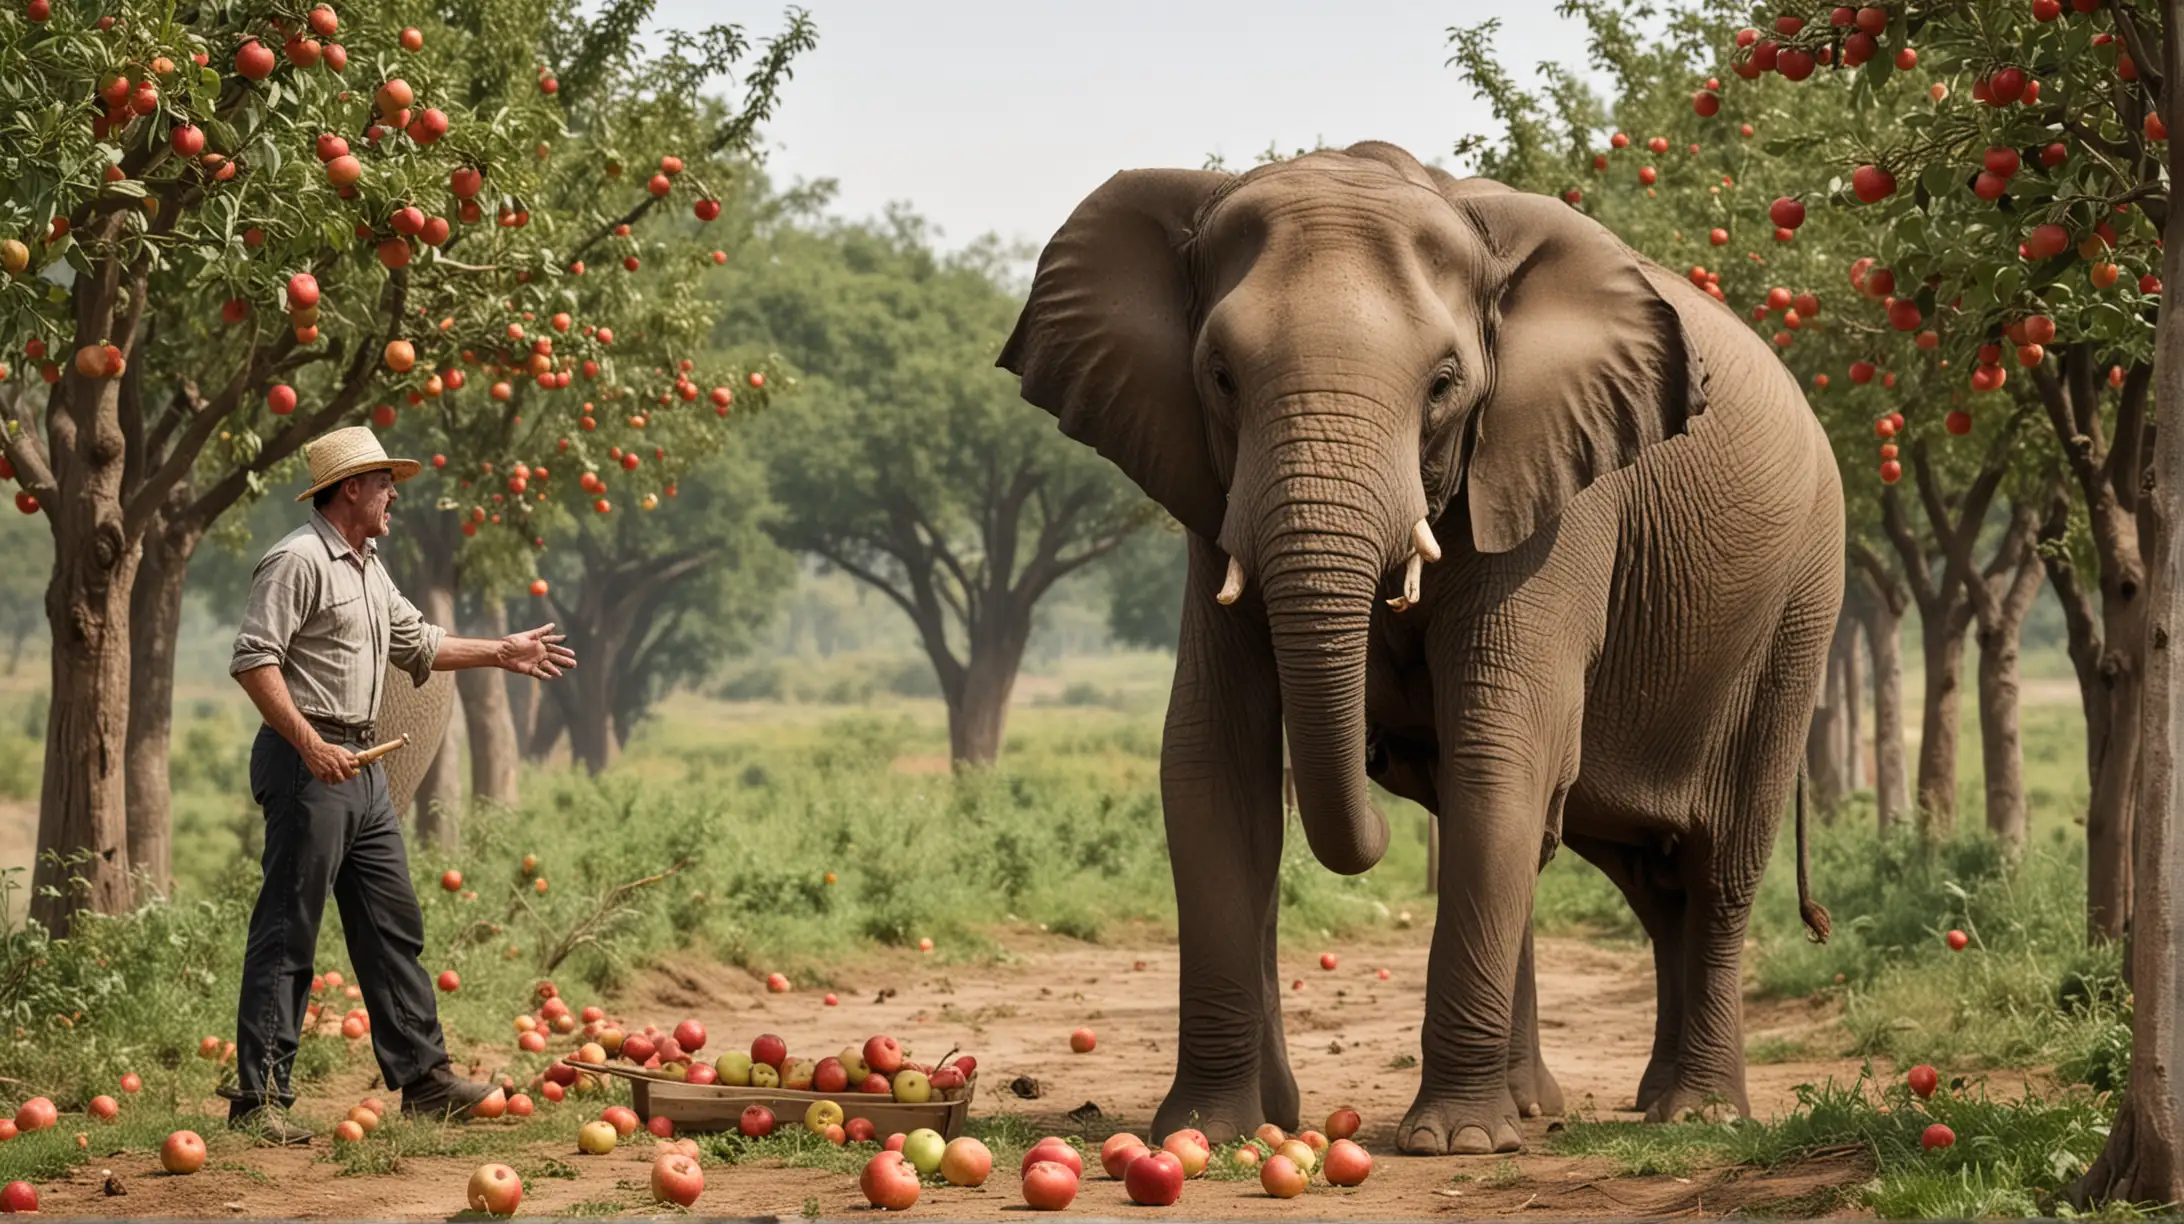 An angry farmer catches an elephant stealing apples from his orchard.

